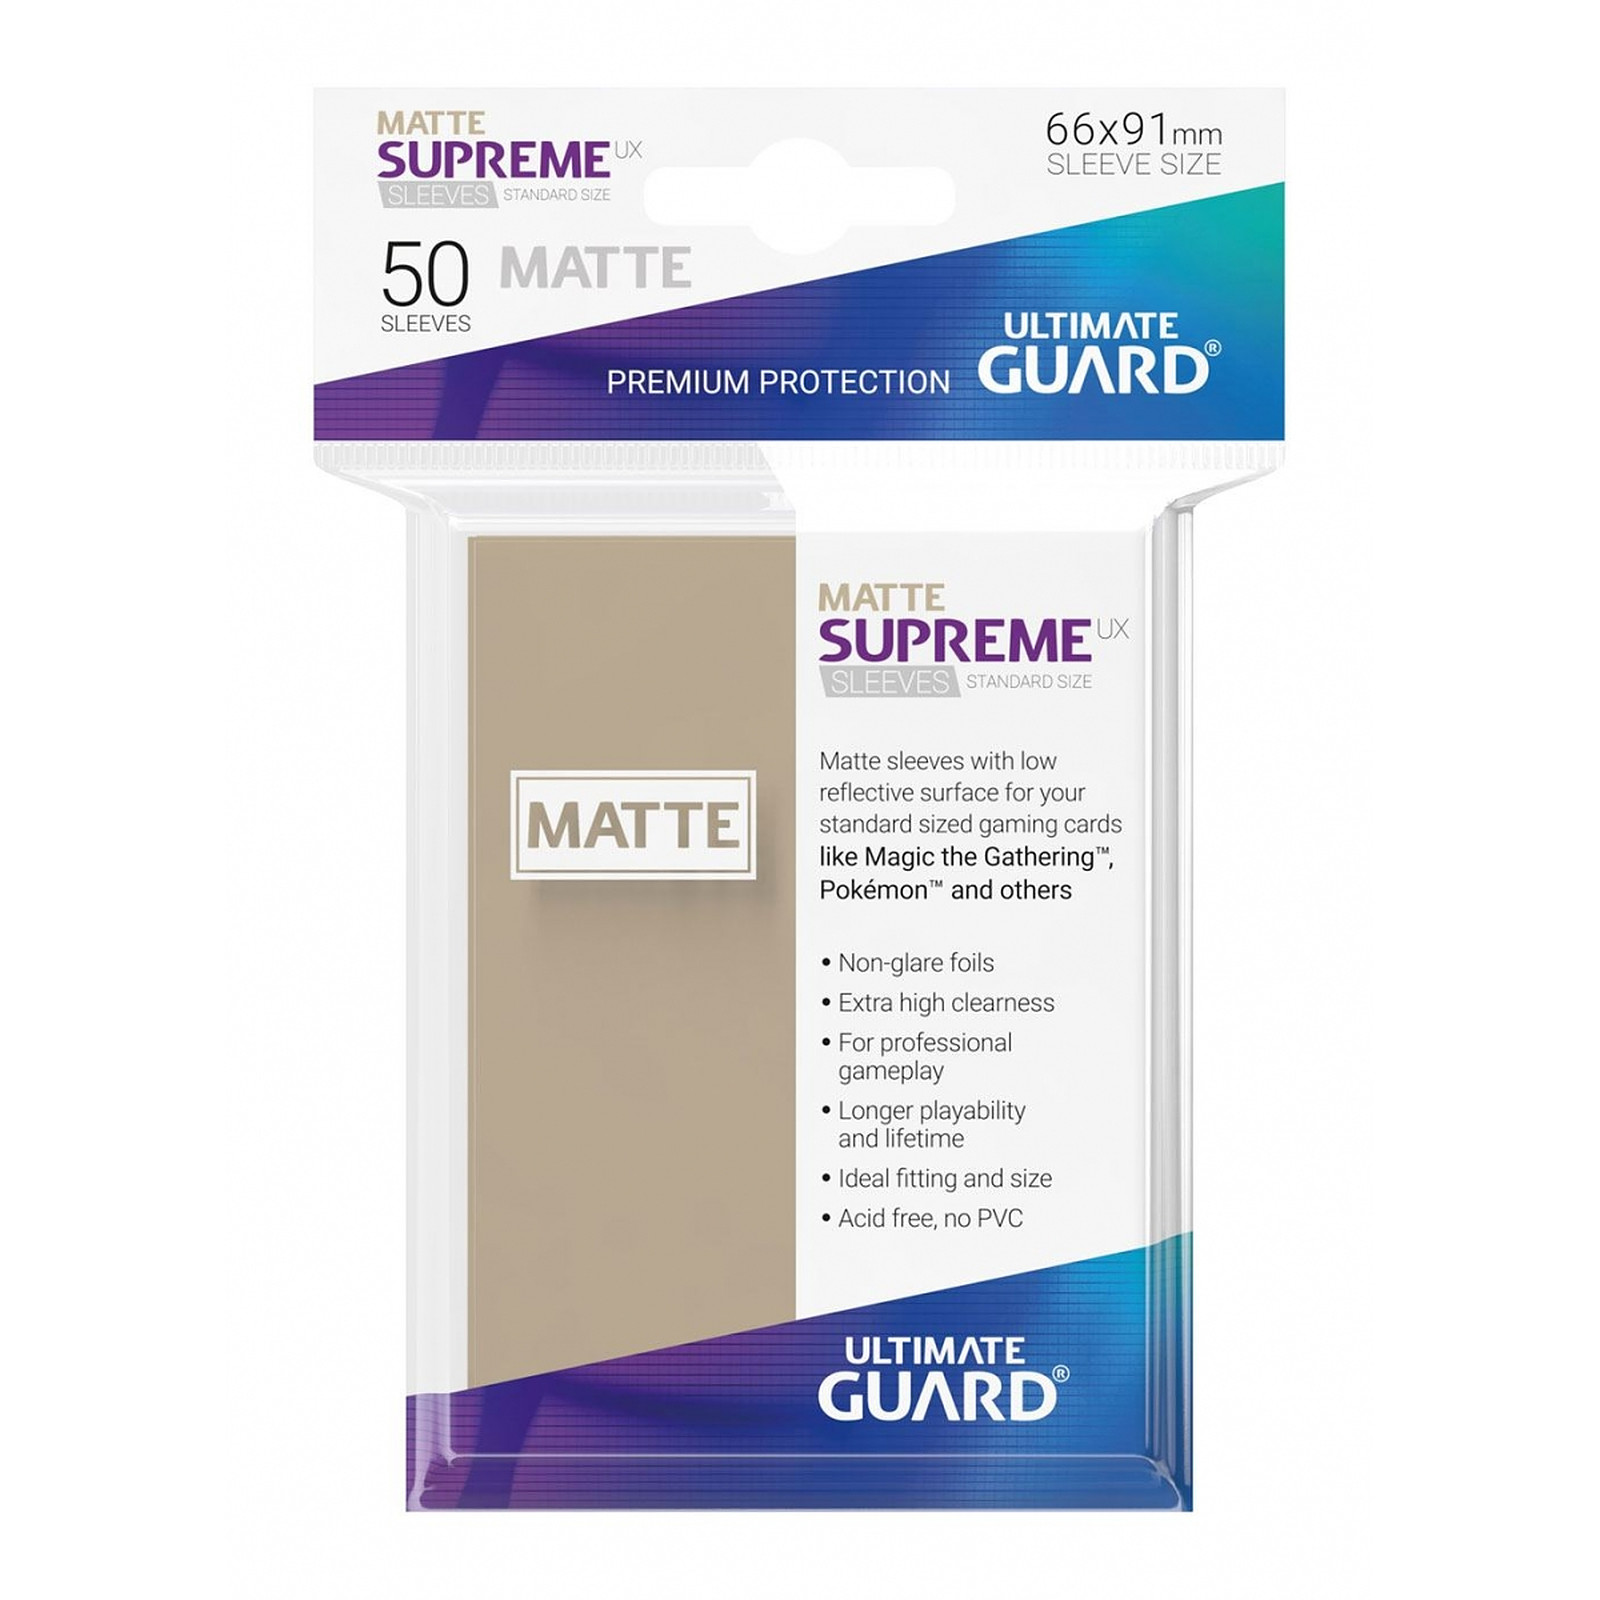 Ultimate Guard - 50 pochettes Supreme UX Sleeves taille standard Sable Mat - Accessoire jeux Ultimate Guard